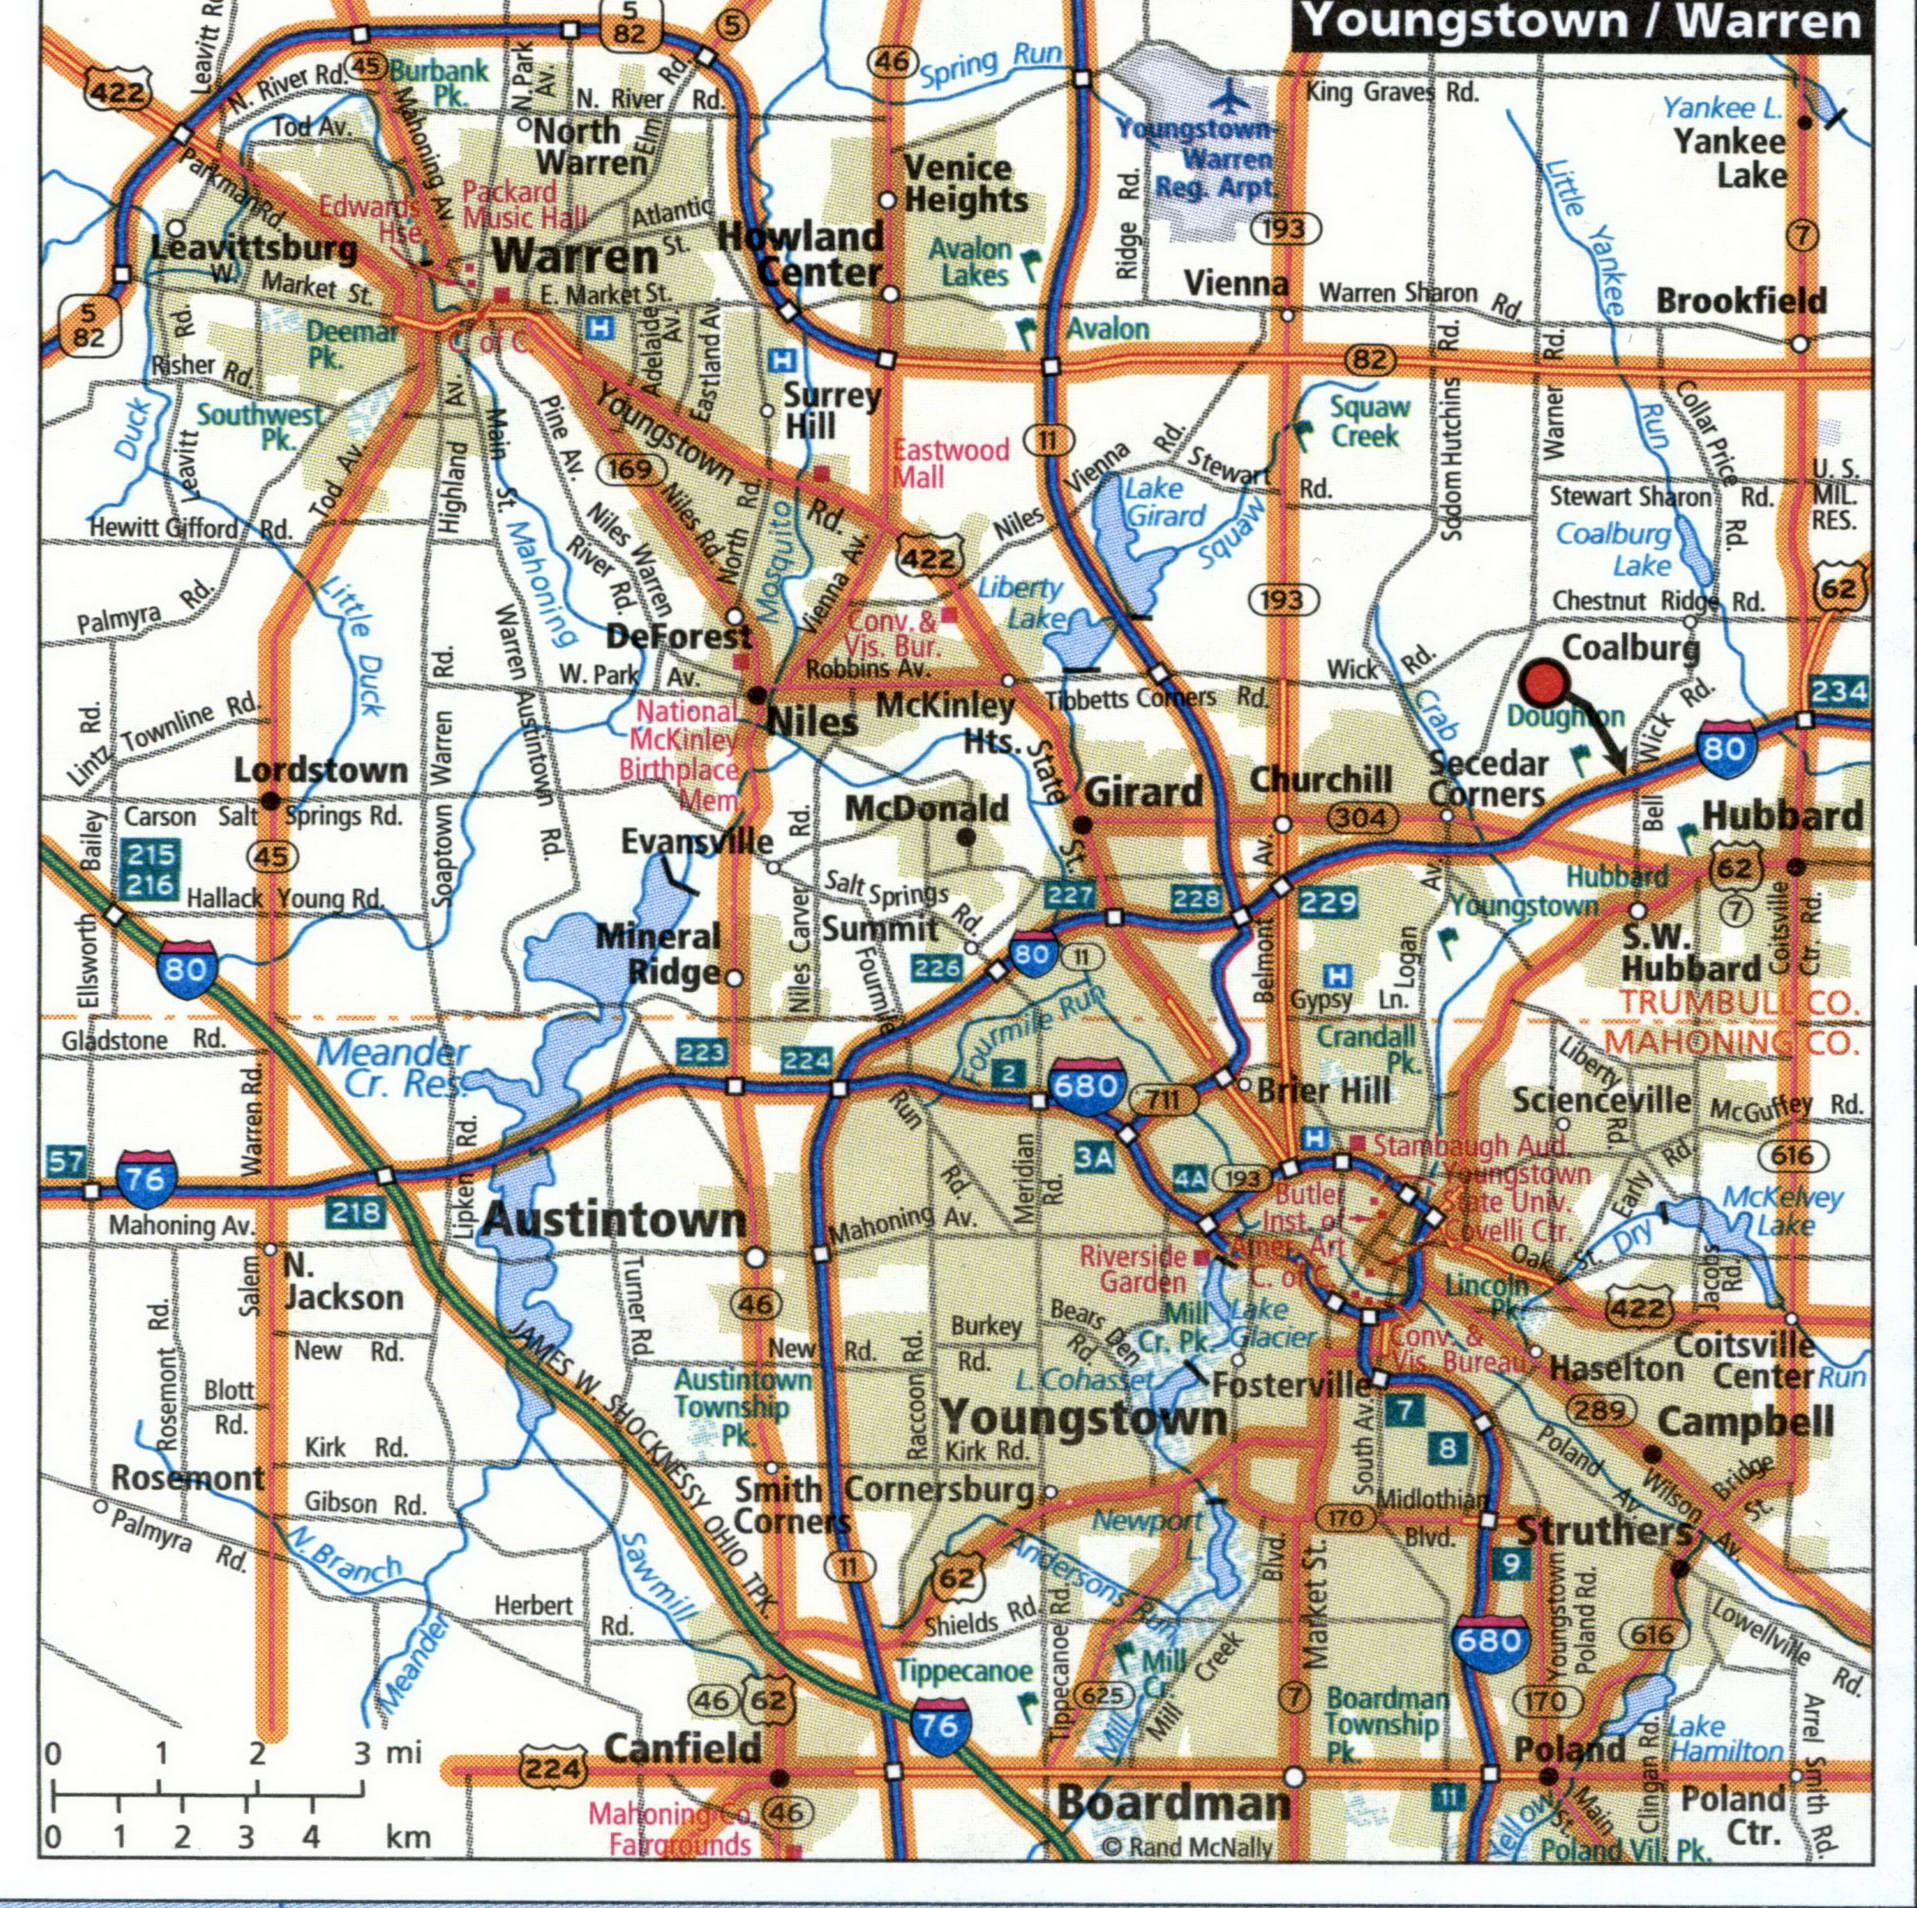 Youngstown city map for truckers